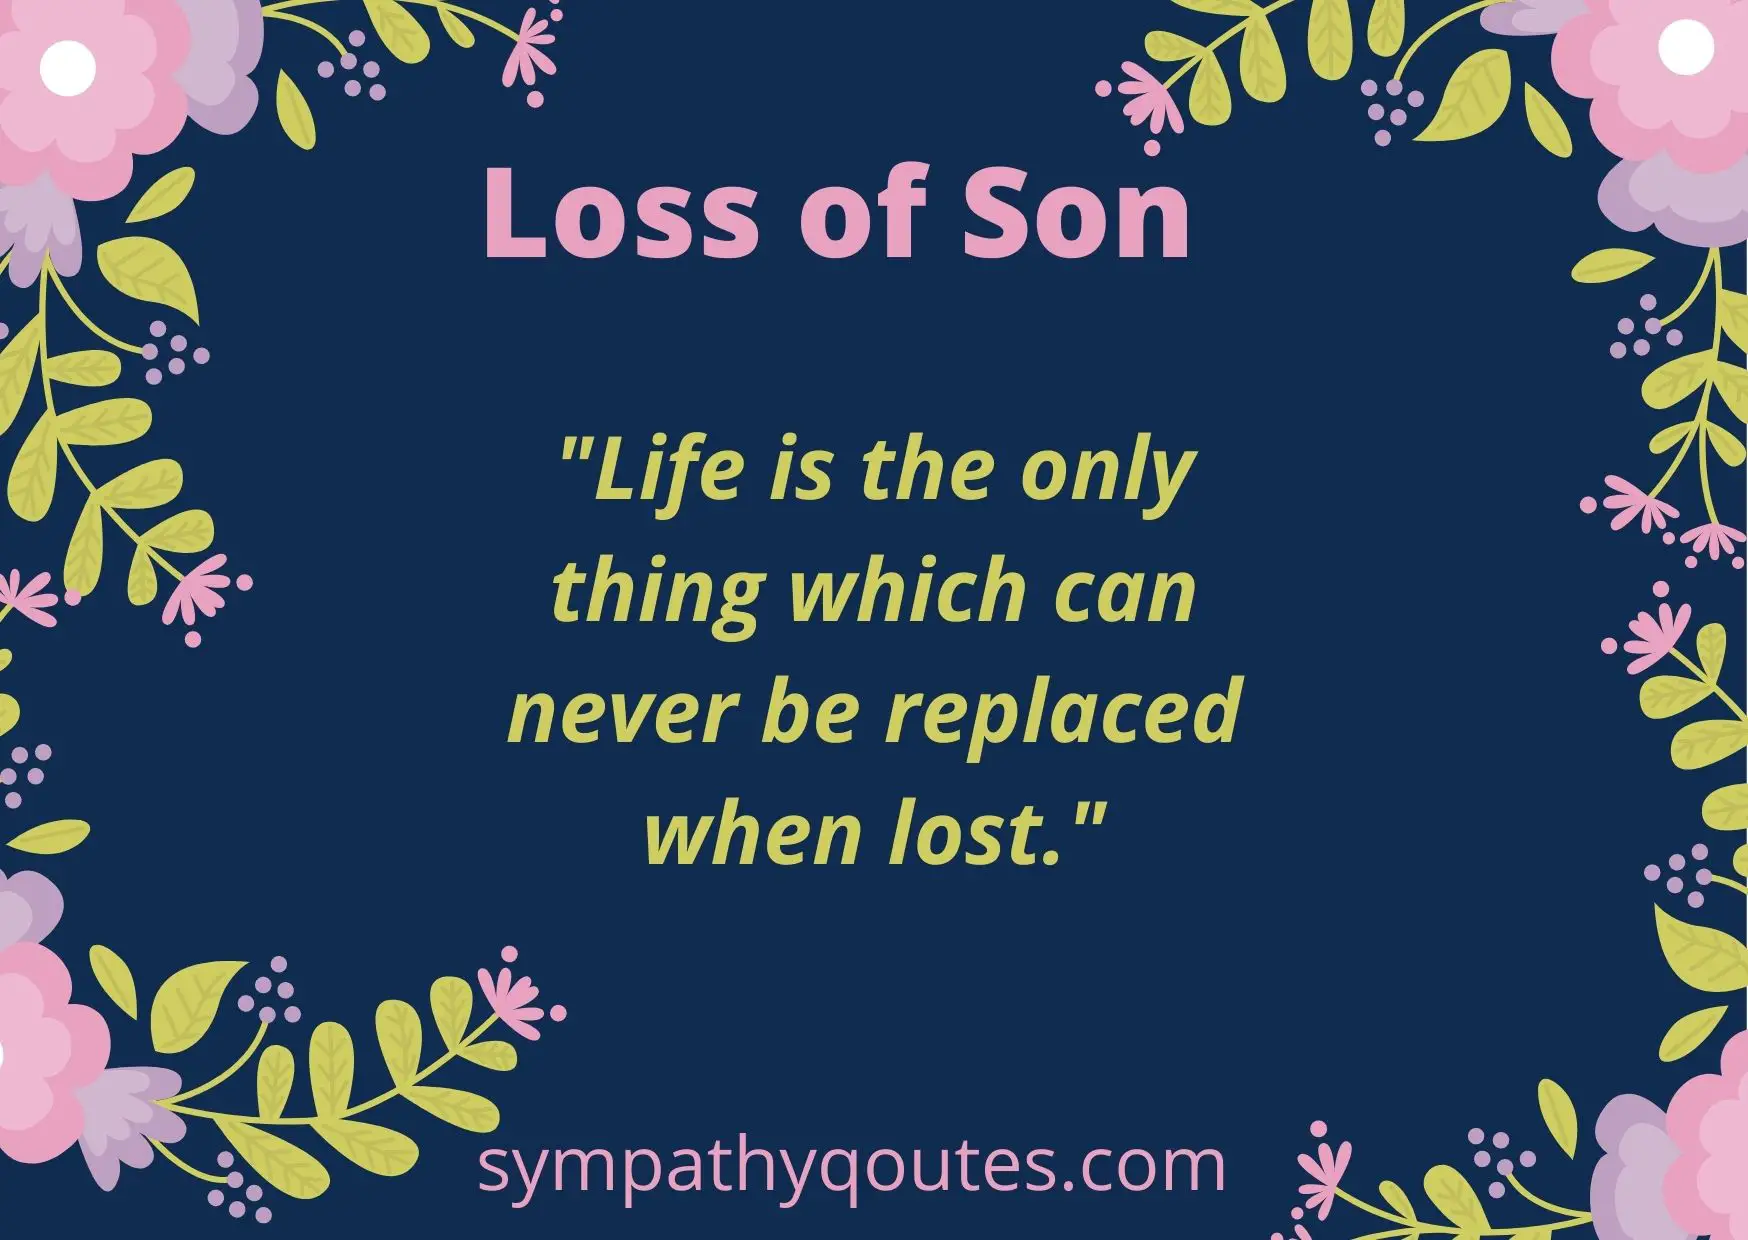 Sympathy Messages for Loss of Son